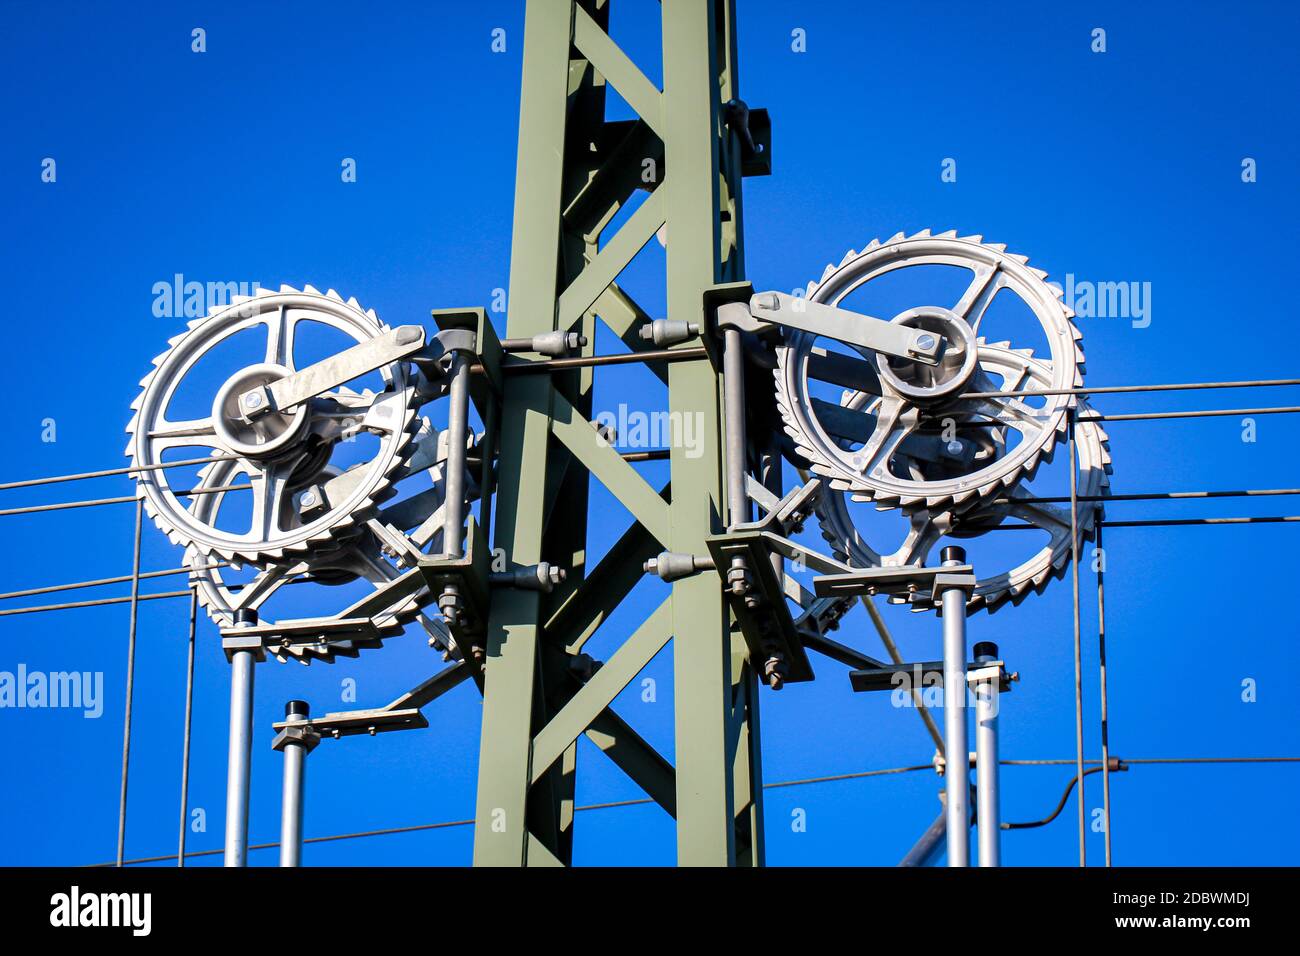 Views of rails and railways. Electrified track systems. Stock Photo